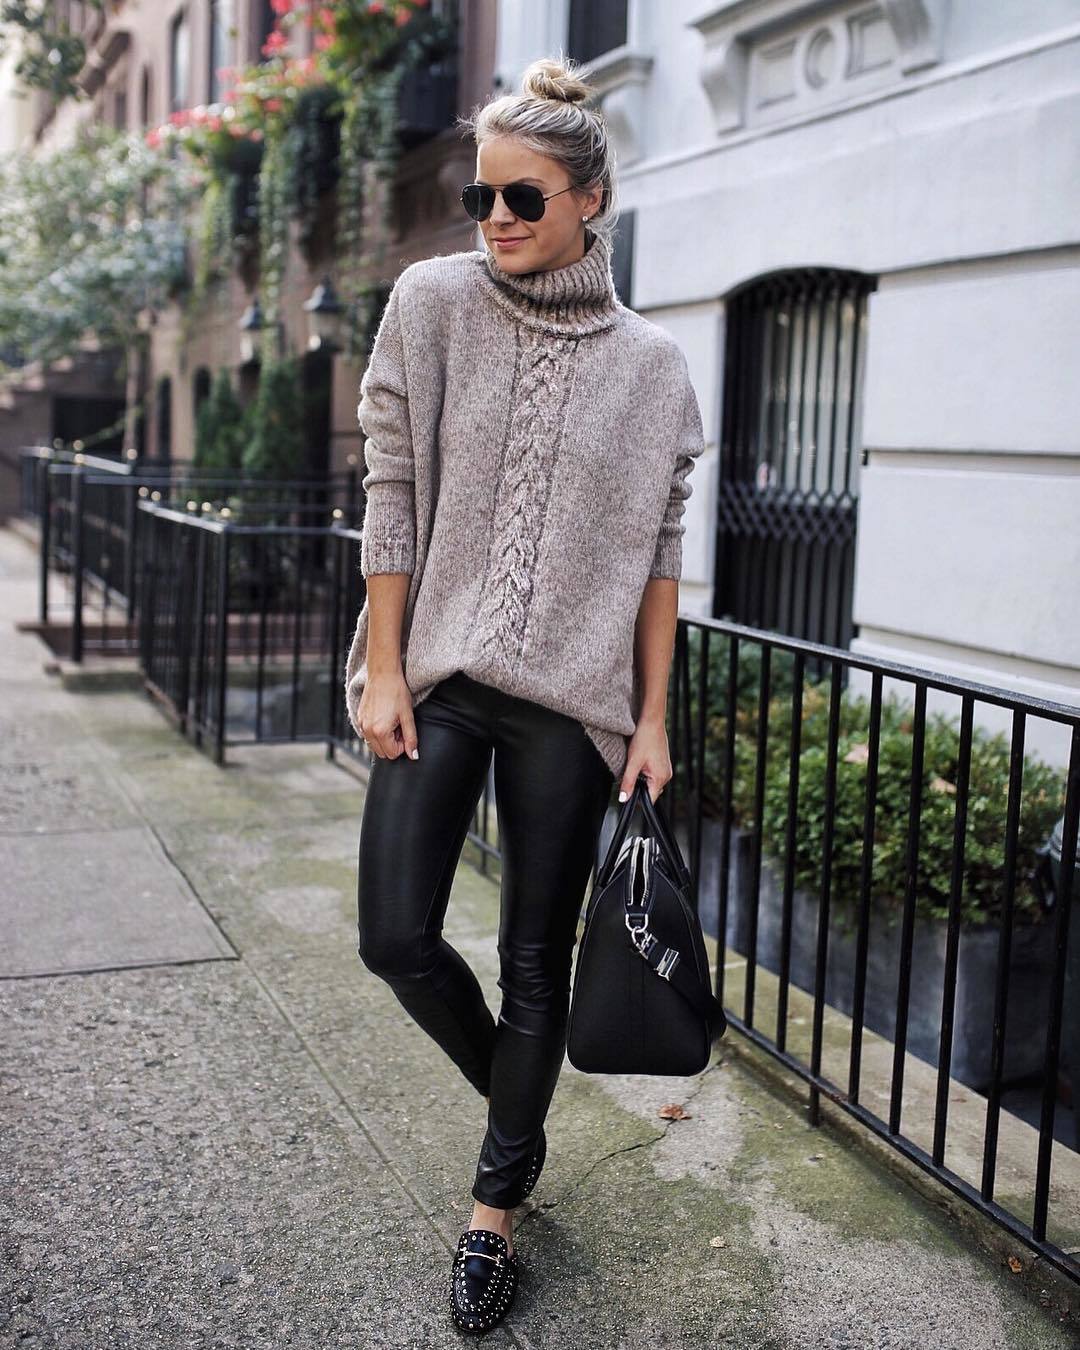 Women's Beige Knit Oversized Sweater, Black Leather Leggings, Black Studded  Leather Loafers, Black Leather Tote Bag